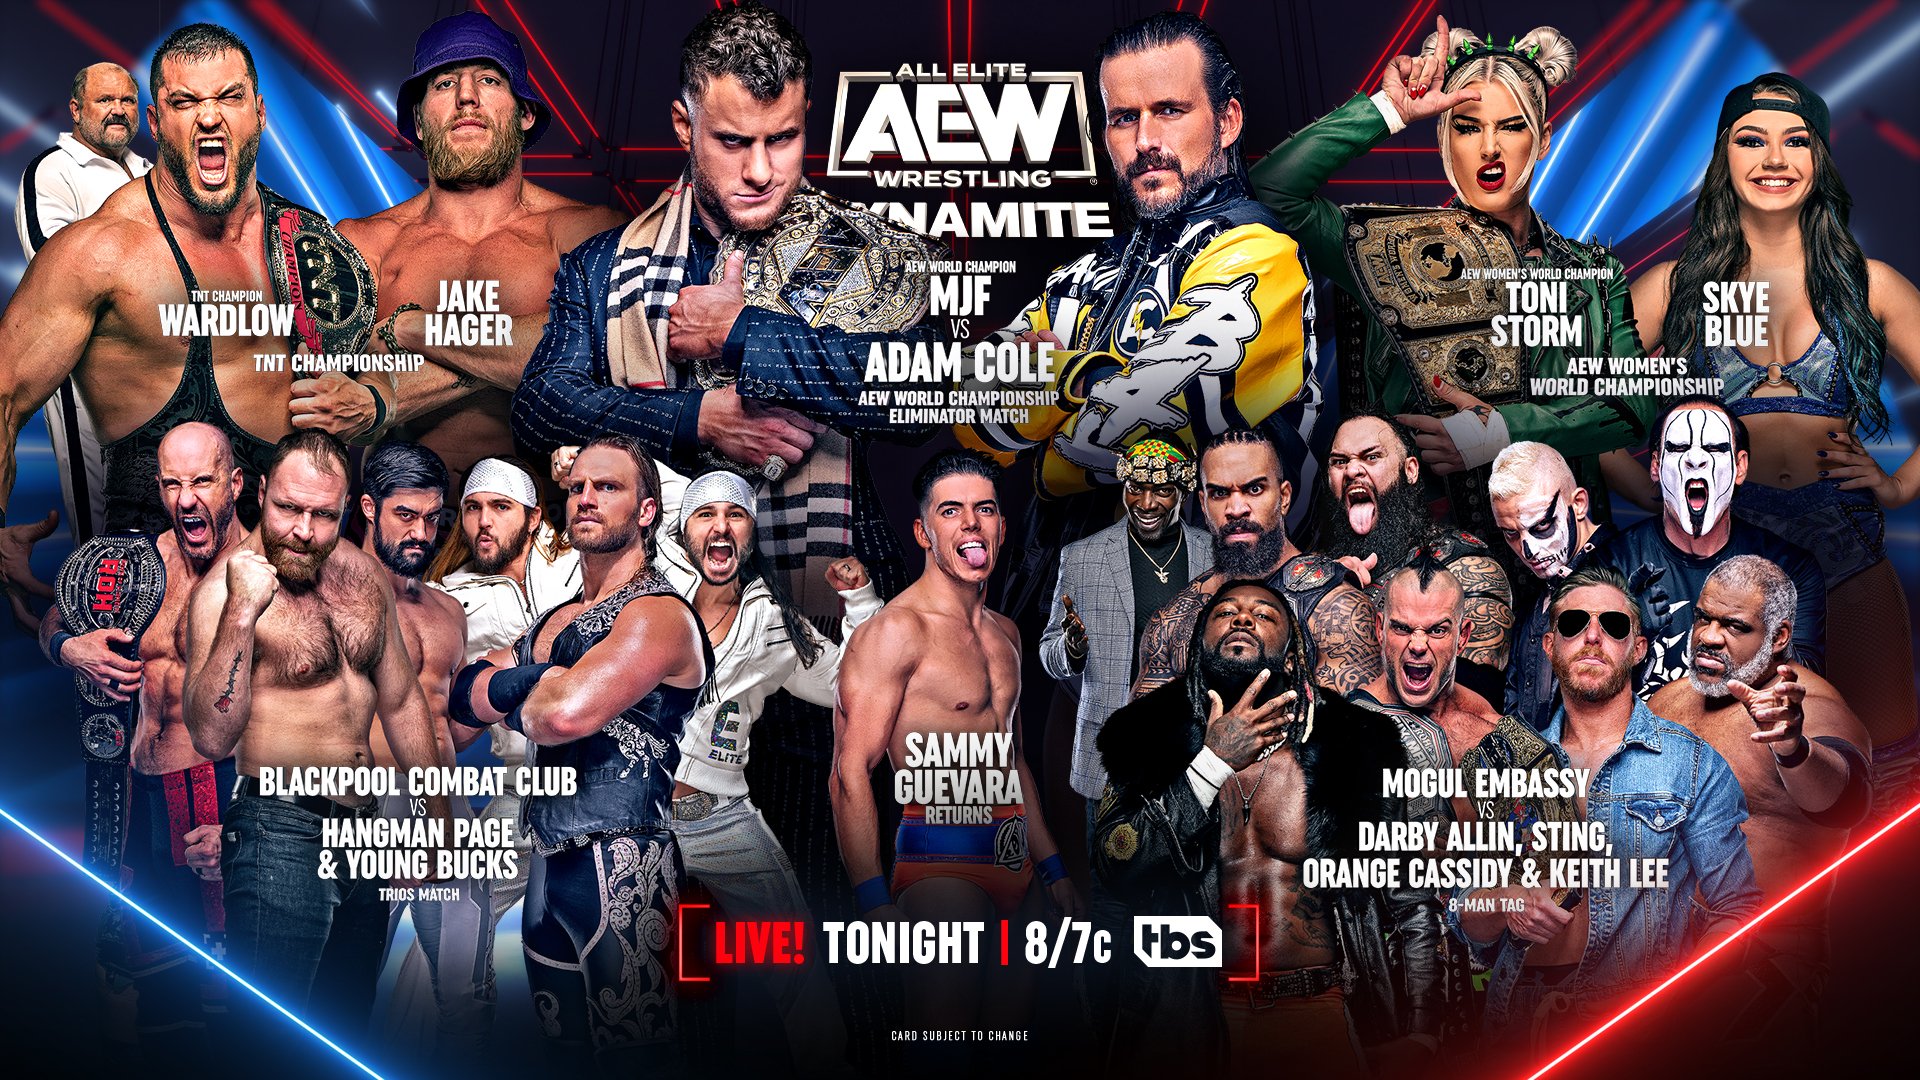 Team Awesome - Hangman Page Retains His #AEW World Championship in a Texas  Death Match, Gets Confronted by Adam Cole #AEWDynamite